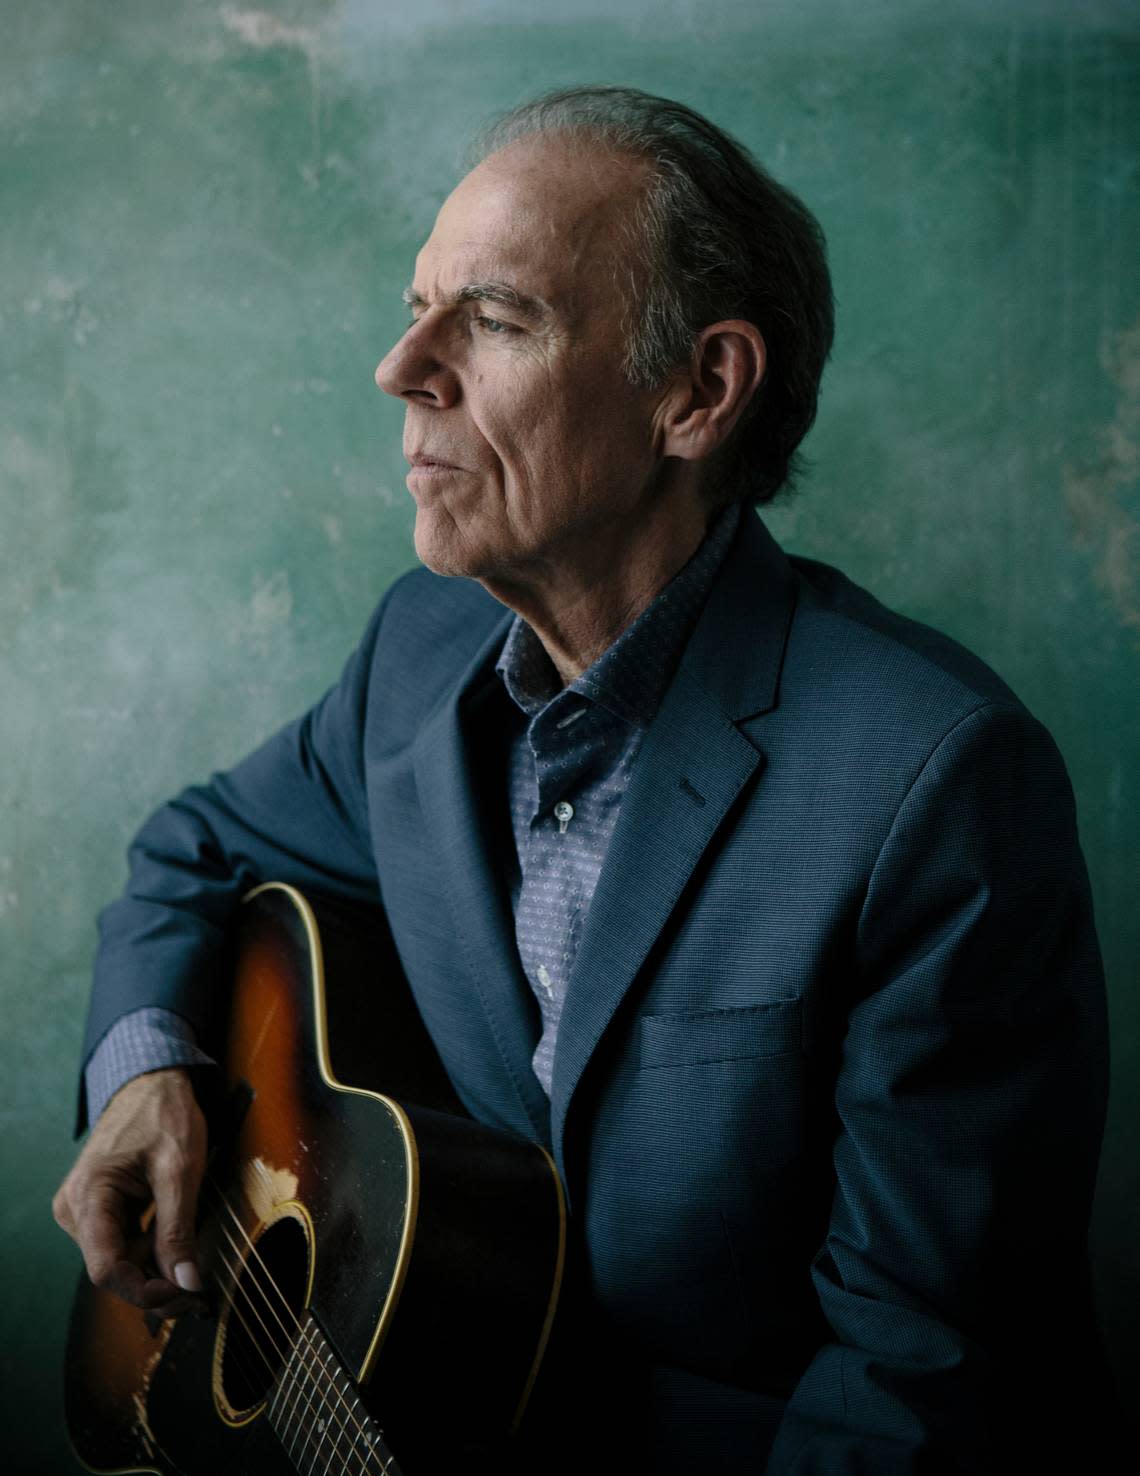 John Hiatt has performed in Lexington many times but never with the Goners, the band that will perform with him at the Lexington Opera House.